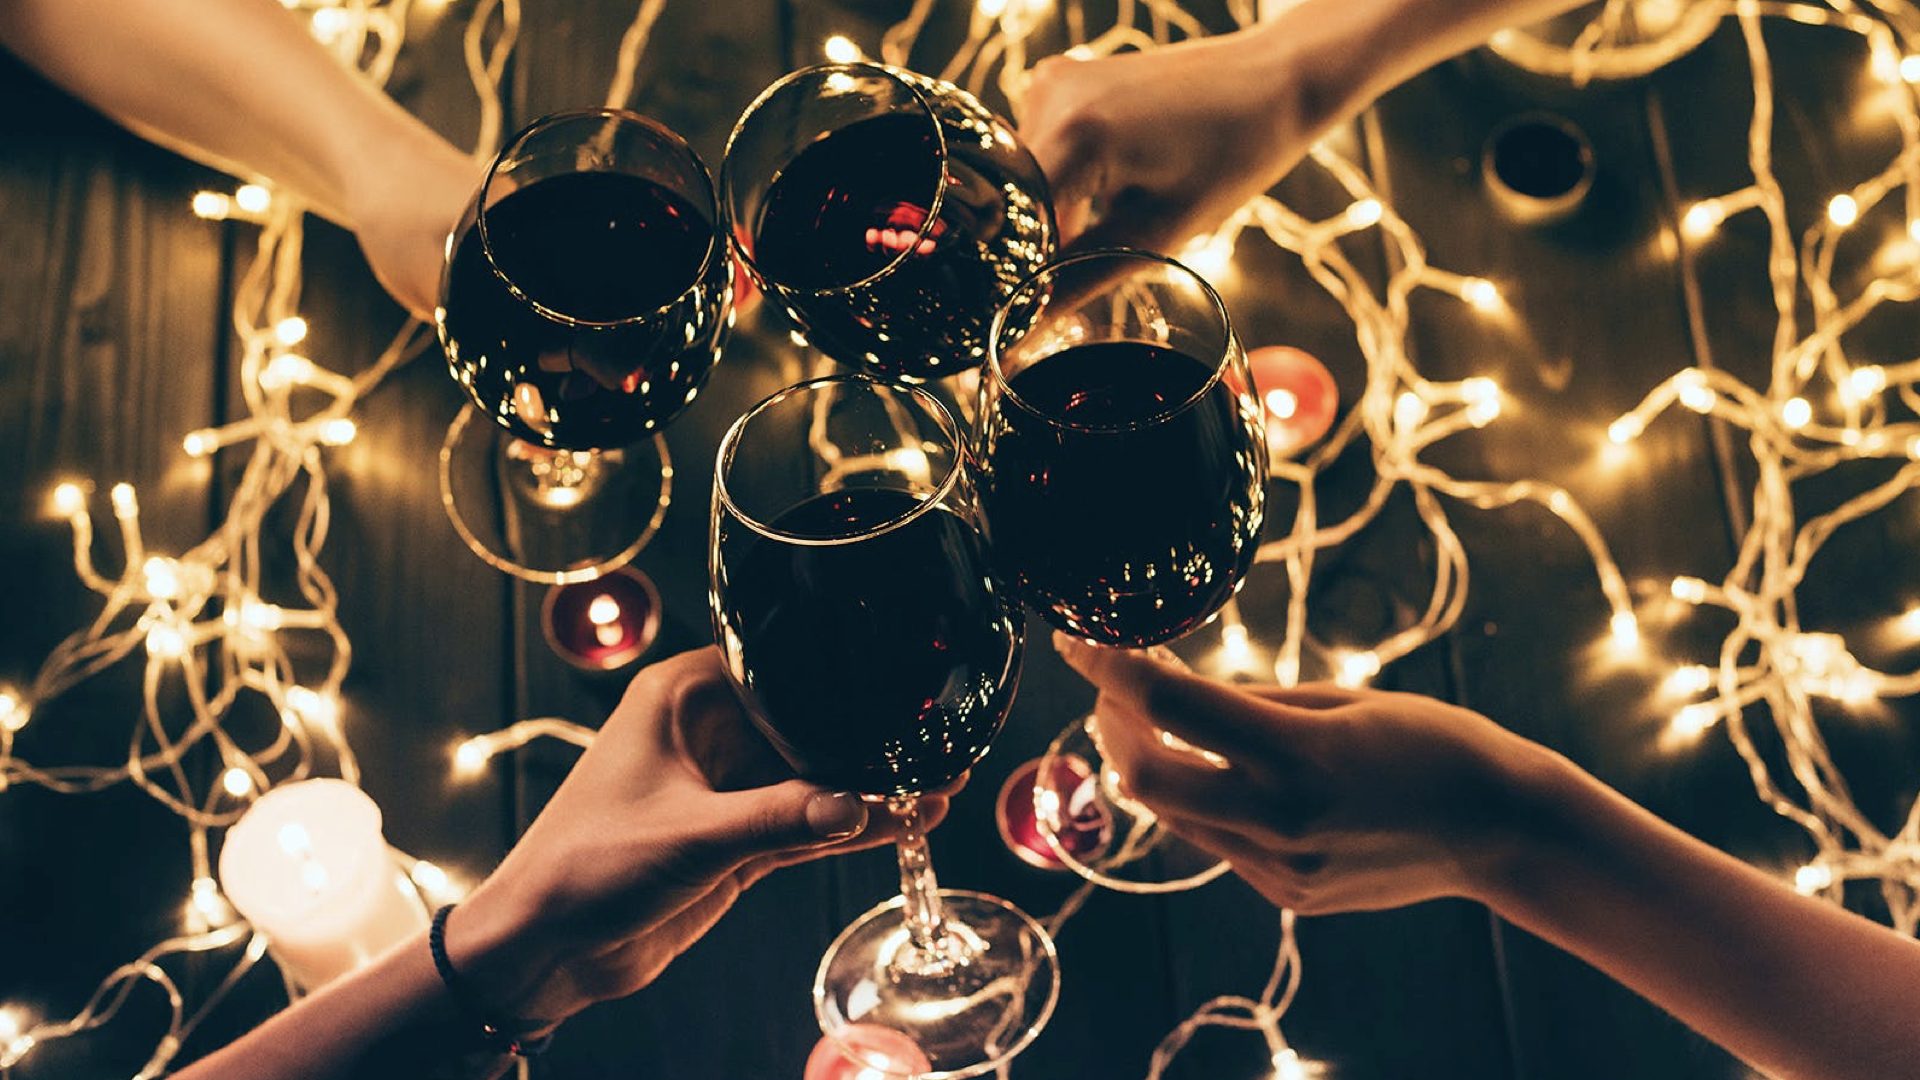 Festive Wines for the Holiday Season